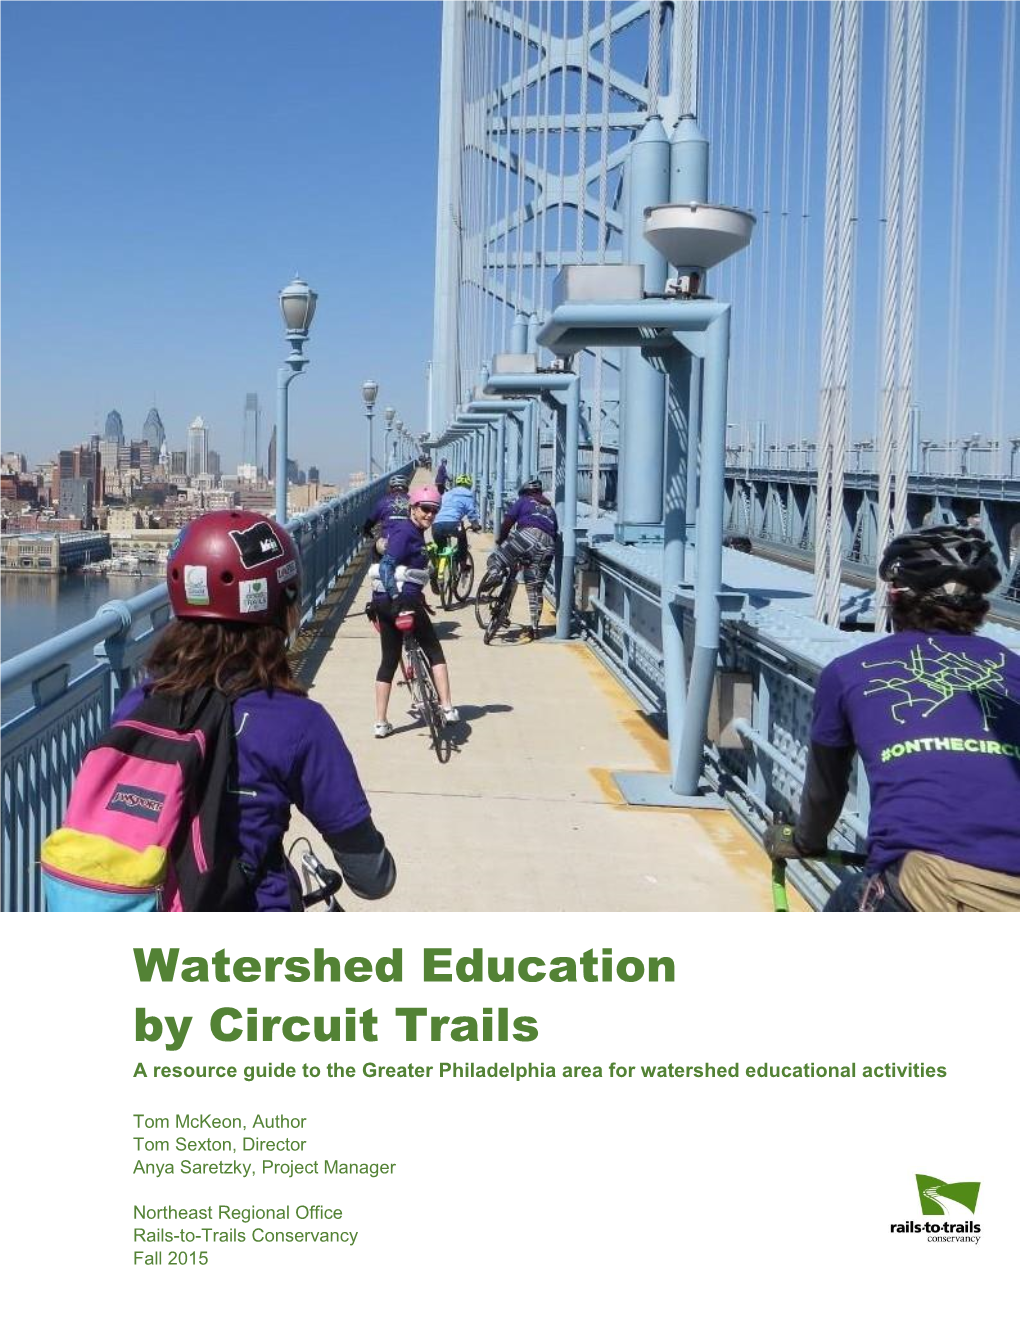 Watershed Education by Circuit Trails a Resource Guide to the Greater Philadelphia Area for Watershed Educational Activities